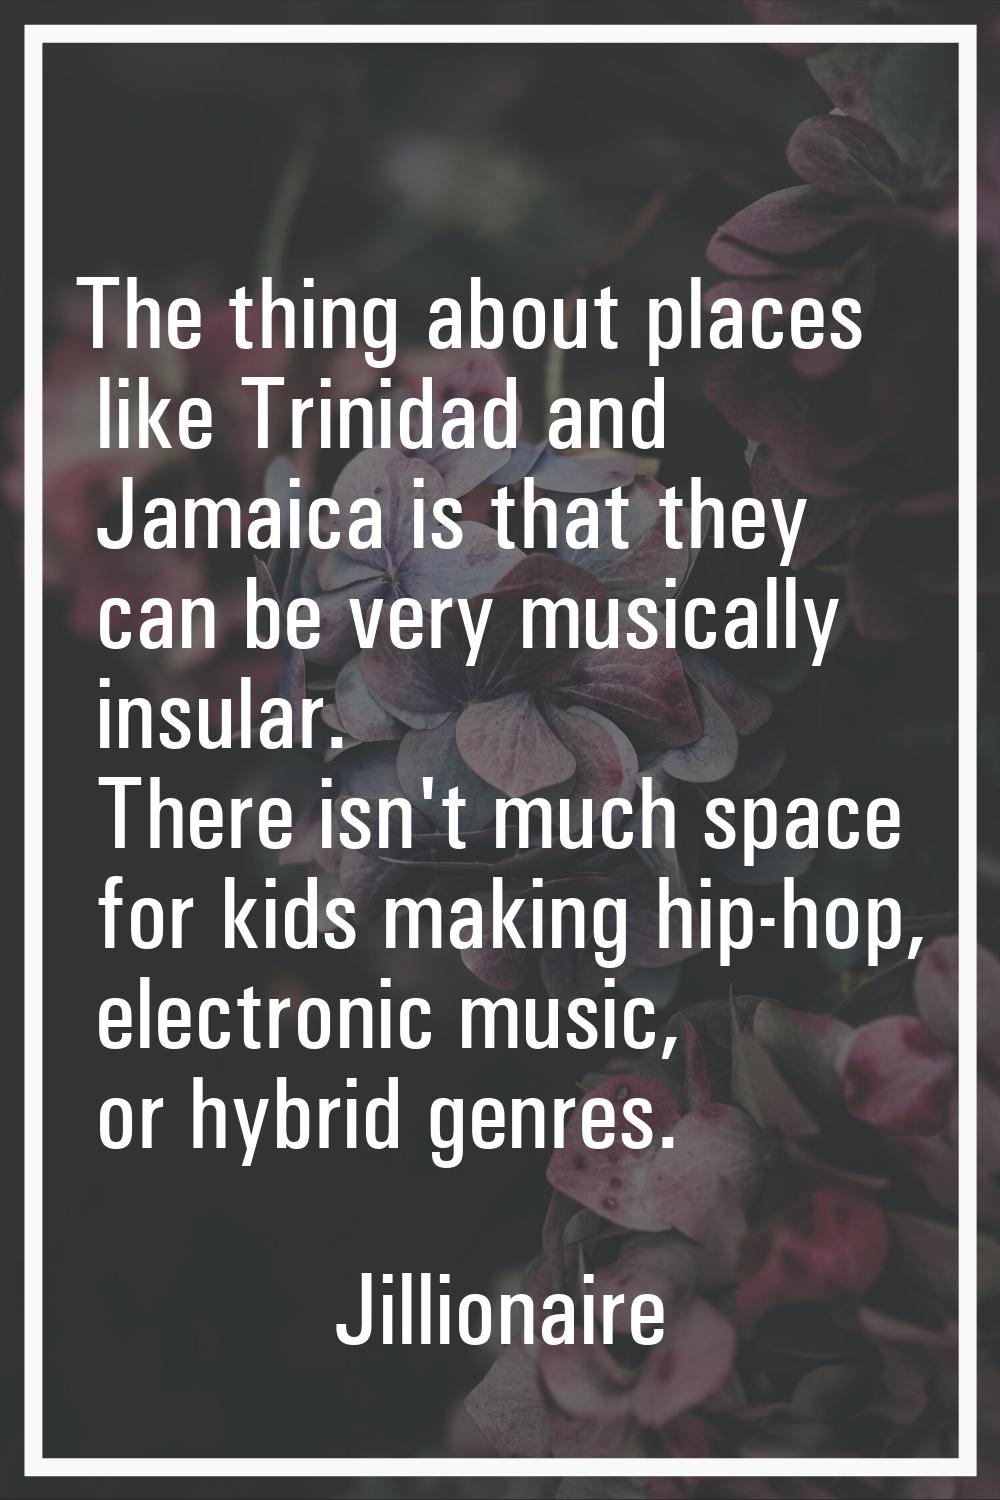 The thing about places like Trinidad and Jamaica is that they can be very musically insular. There 